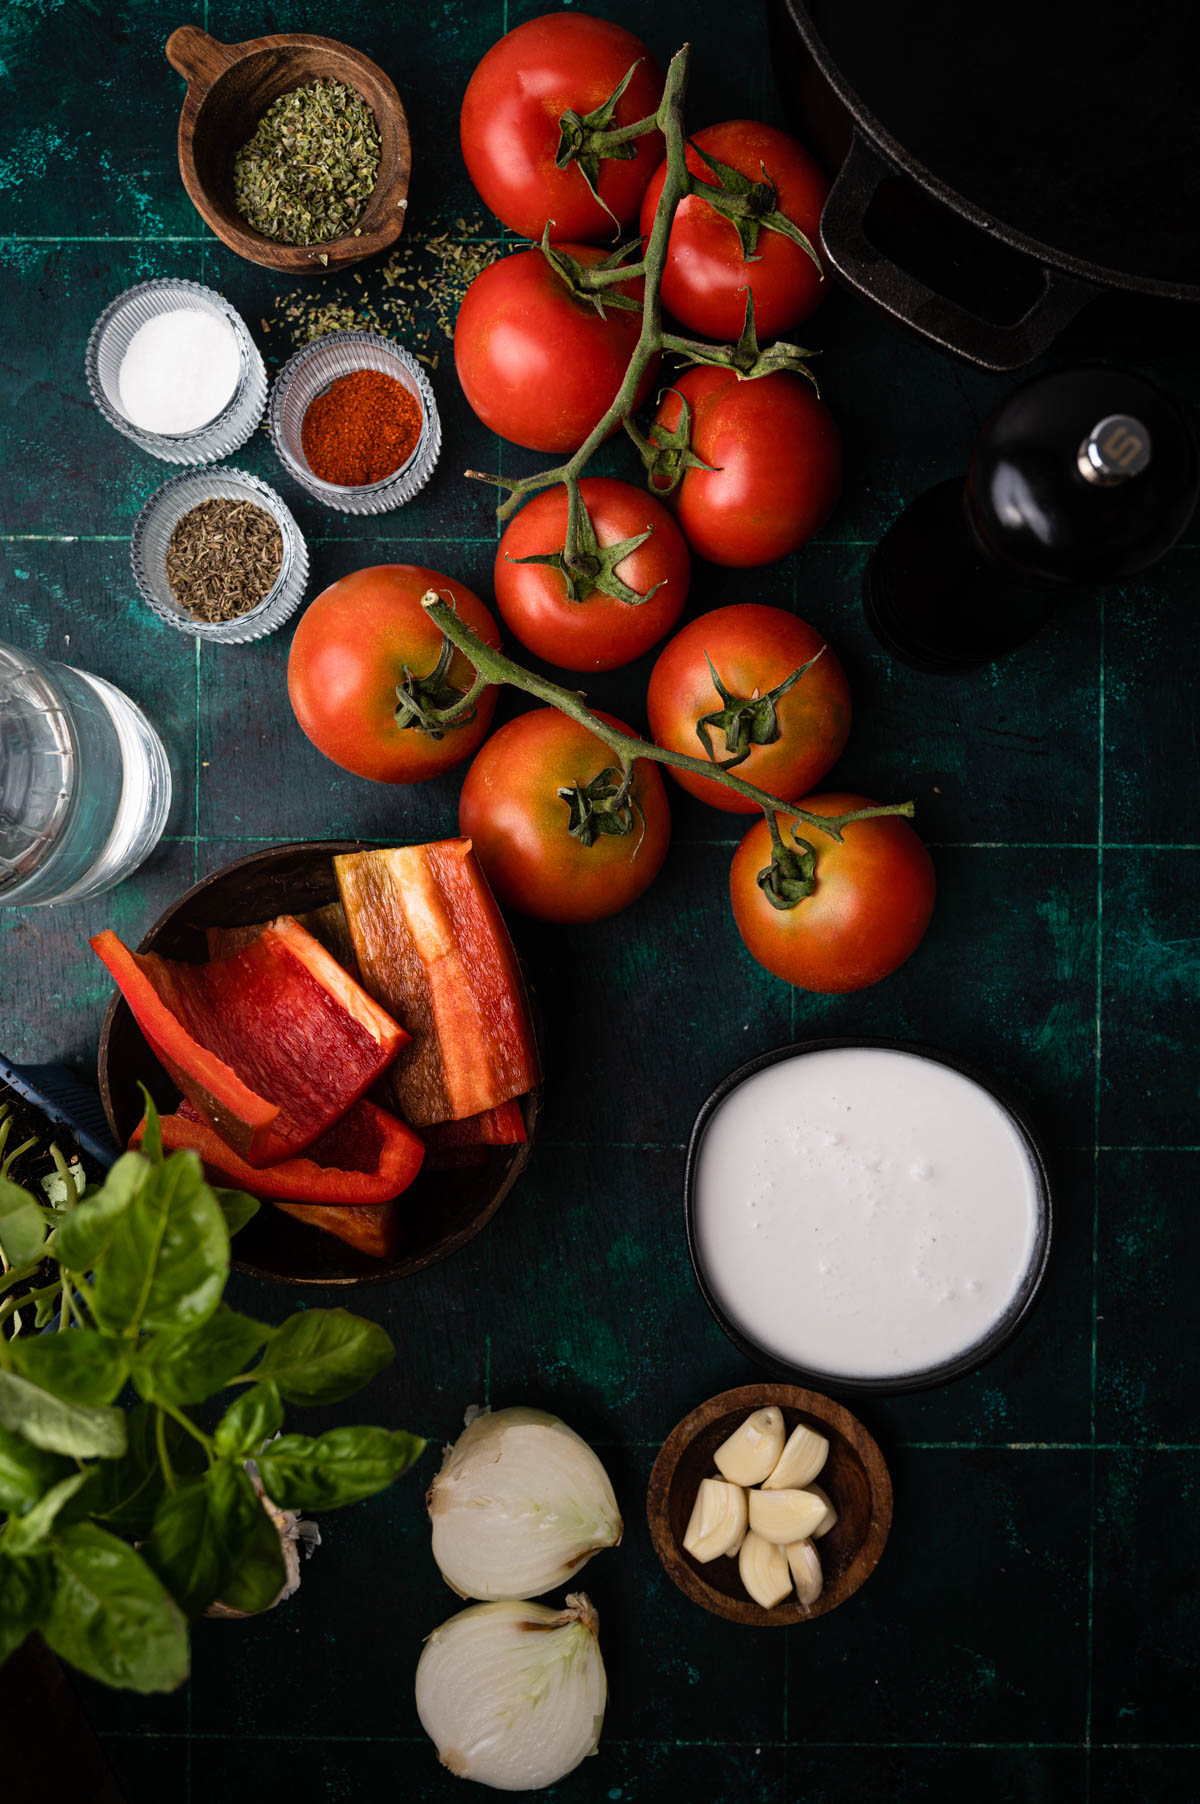 Top view of a kitchen counter with fresh tomatoes, spices, sliced bell peppers, onions, garlic, and a bowl of sauce, arranged neatly for cooking.